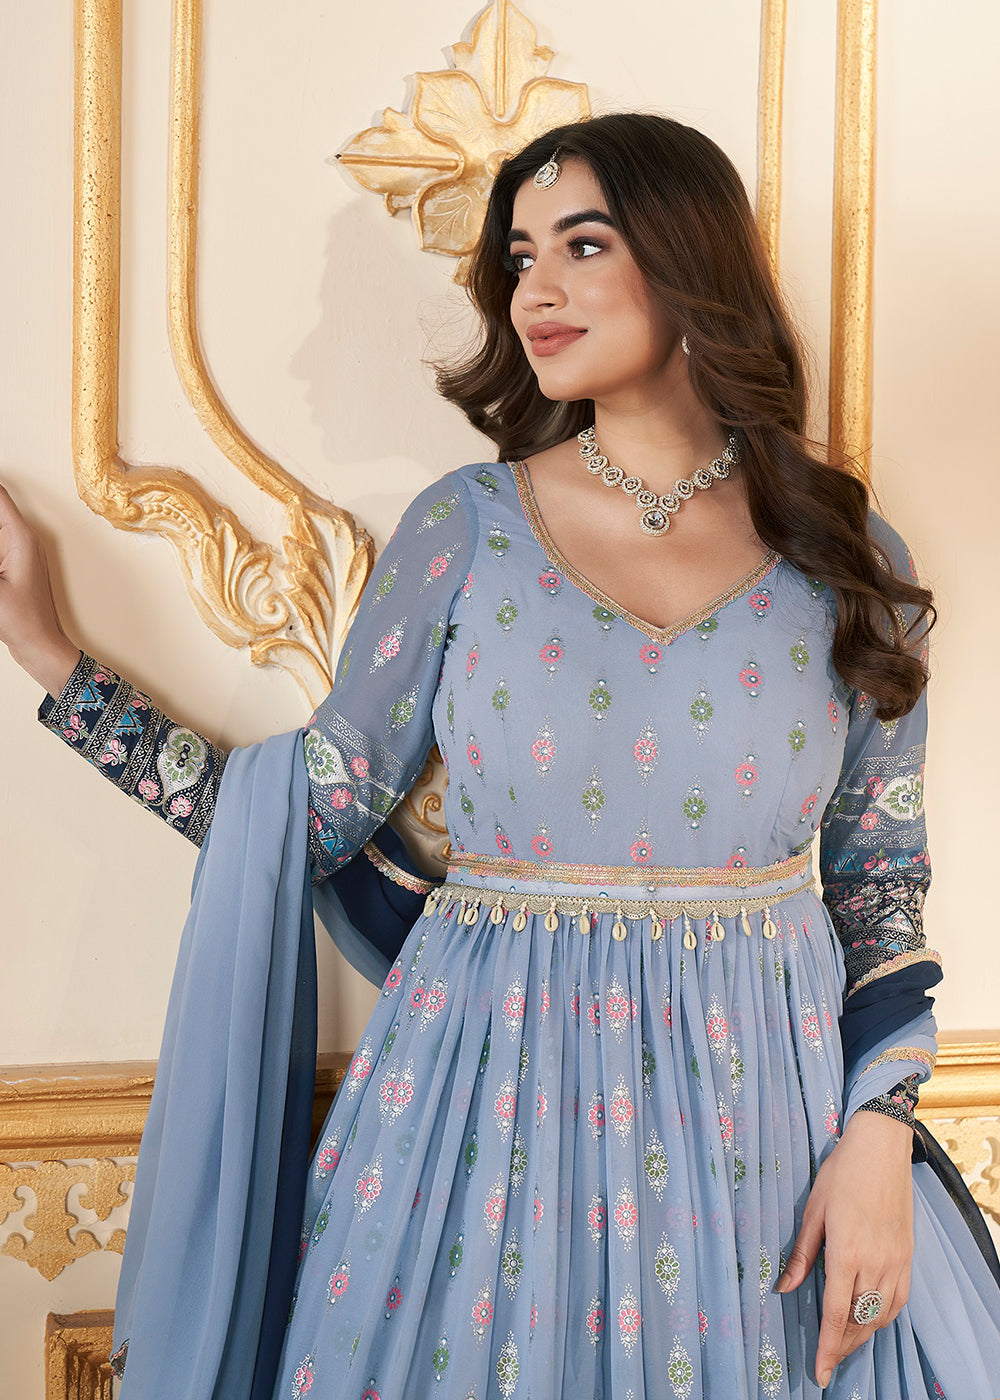 Buy Now Blue Metalic Foil Work Embroidered Wedding Festive Anarkali Gown Online in USA, UK, Australia, Canada & Worldwide at Empress Clothing. 